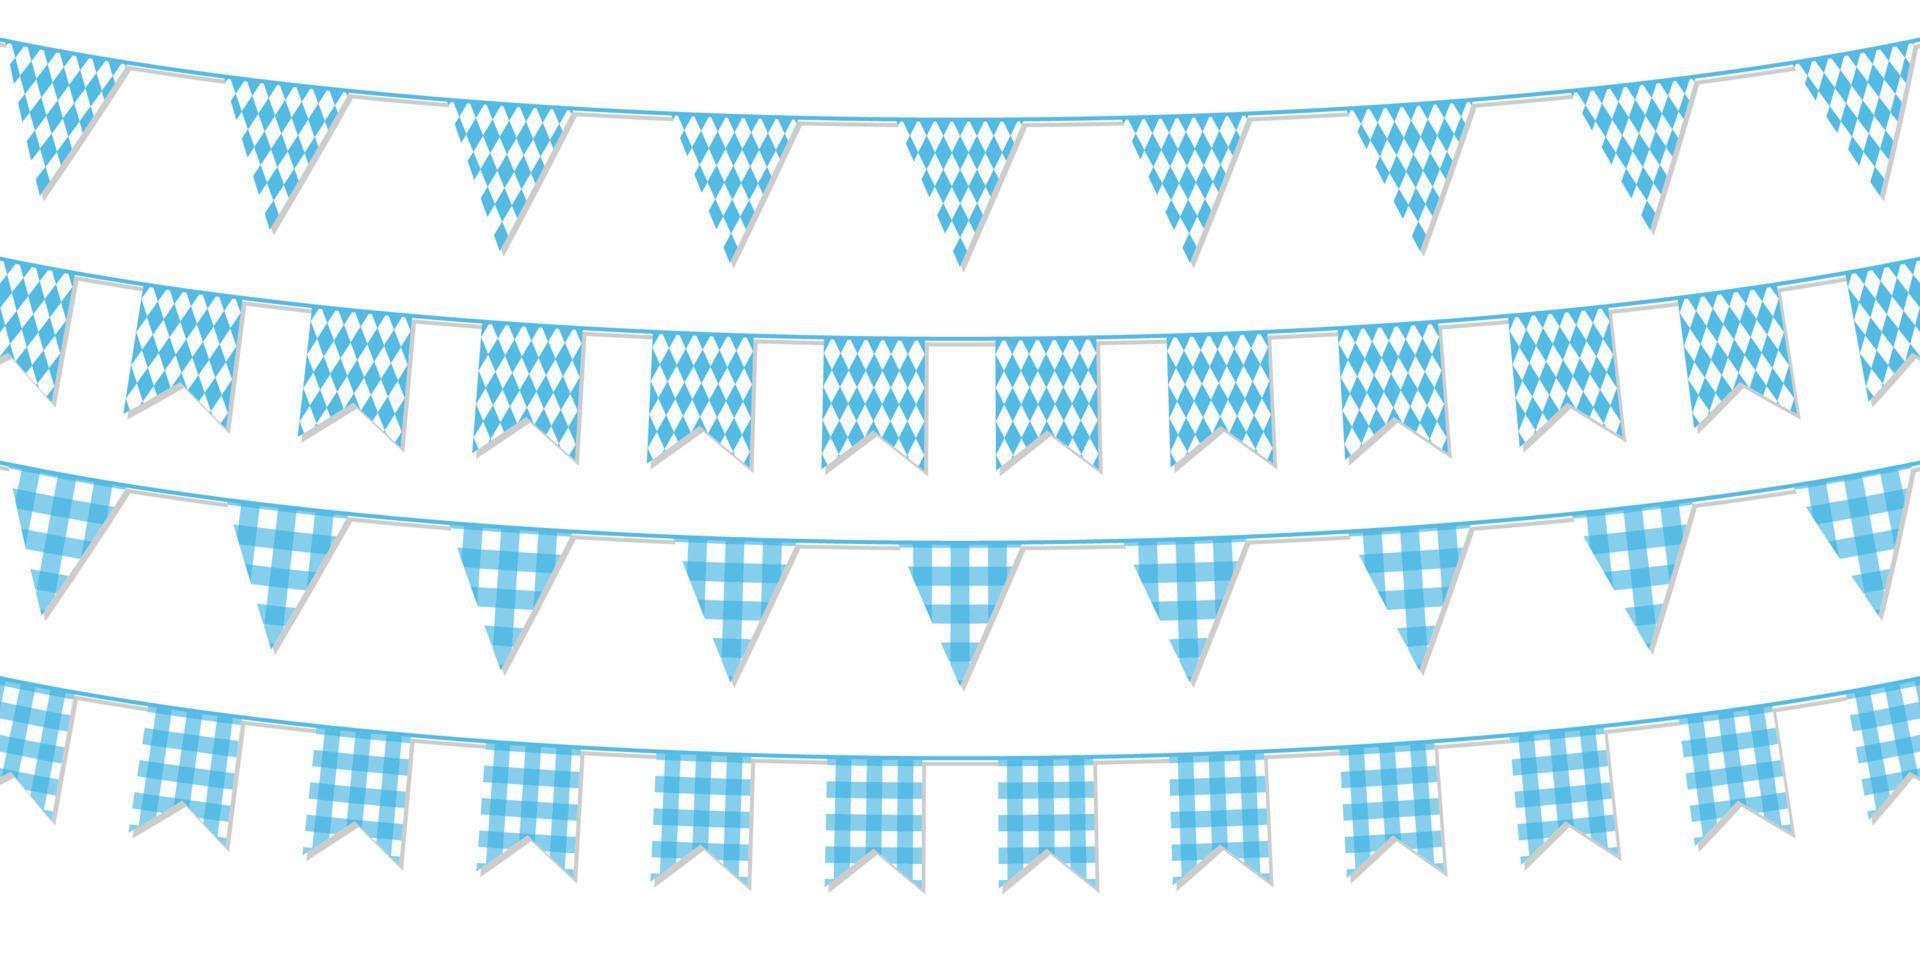 Festive paper garland collection isolated on white background. Germany beer festival. Vector design template for greeting cards, invitation, advertising banners, etc.